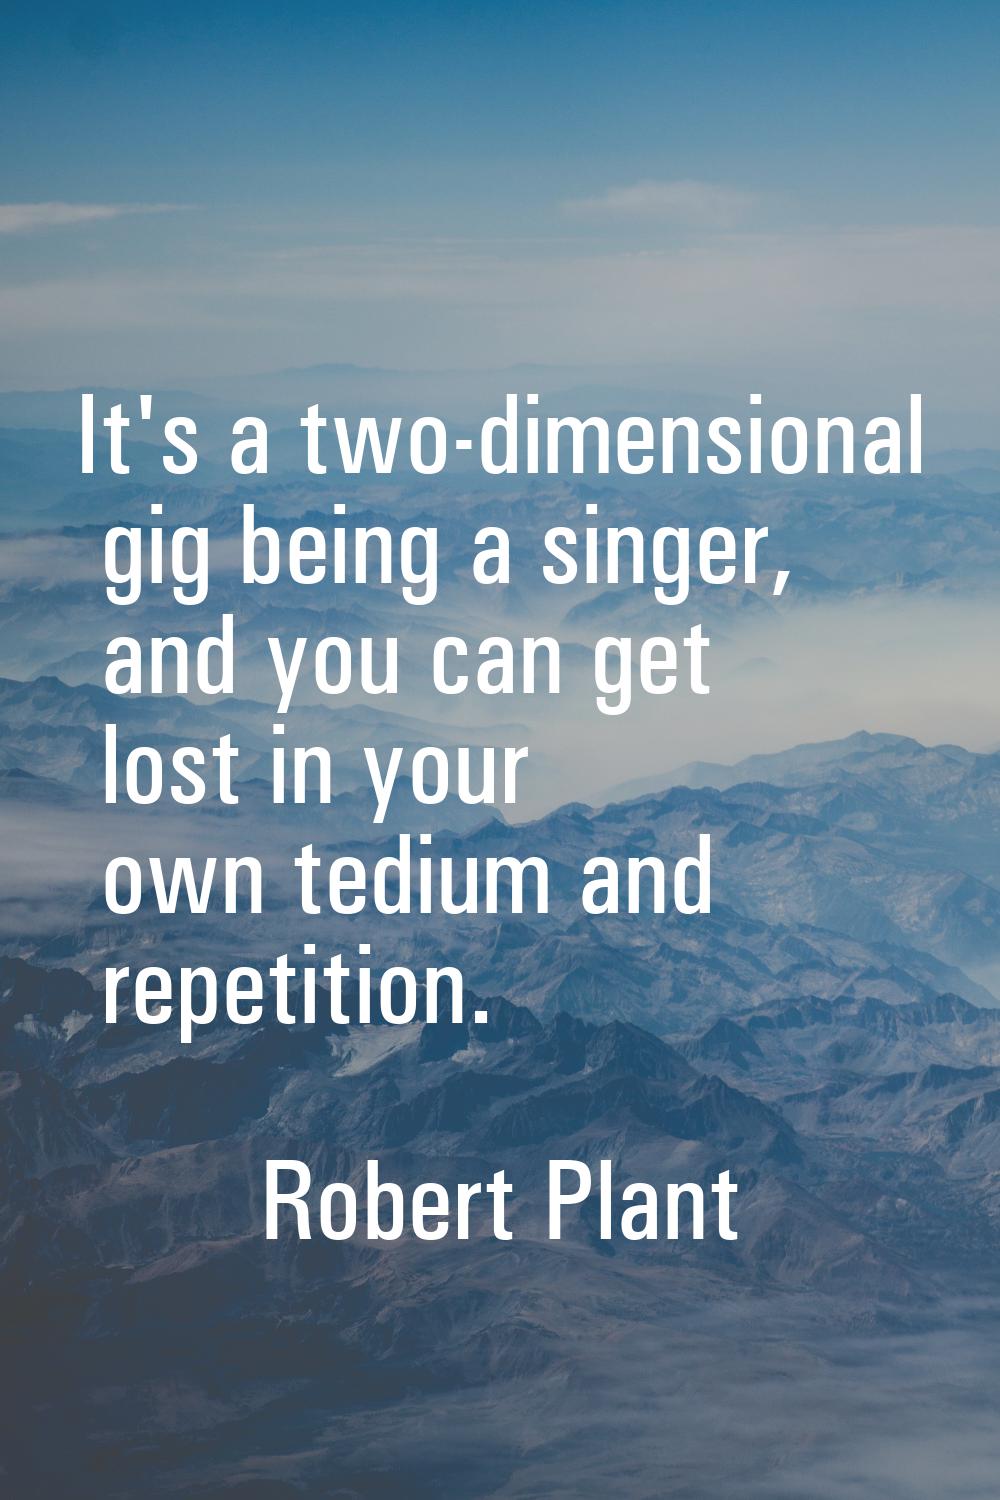 It's a two-dimensional gig being a singer, and you can get lost in your own tedium and repetition.